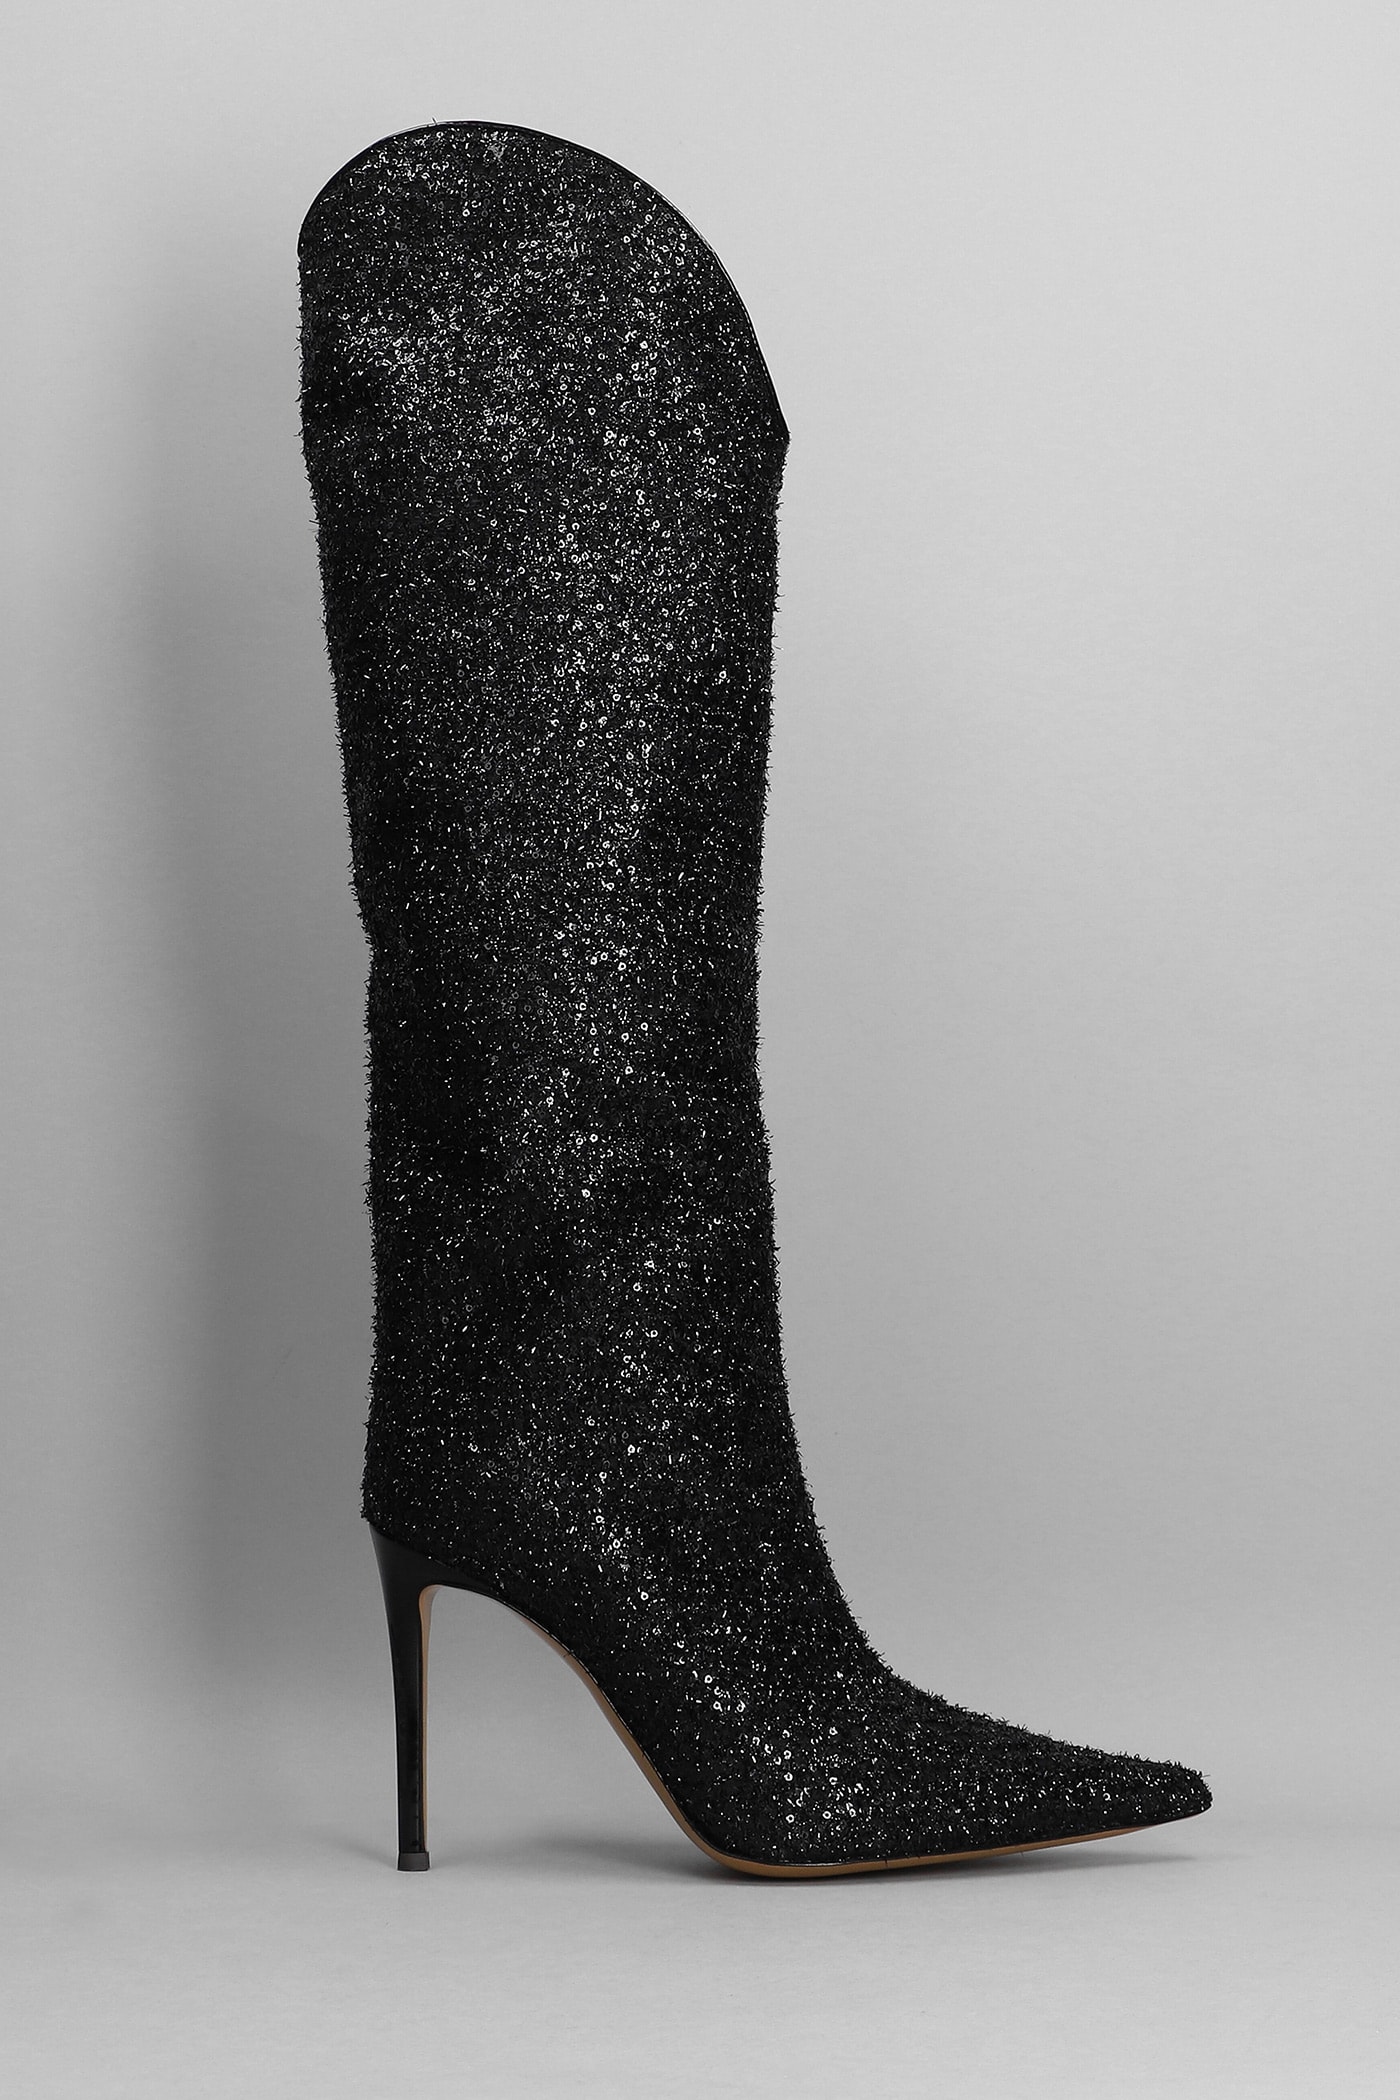 ALEXANDRE VAUTHIER HIGH HEELS BOOTS IN BLACK POLYESTER